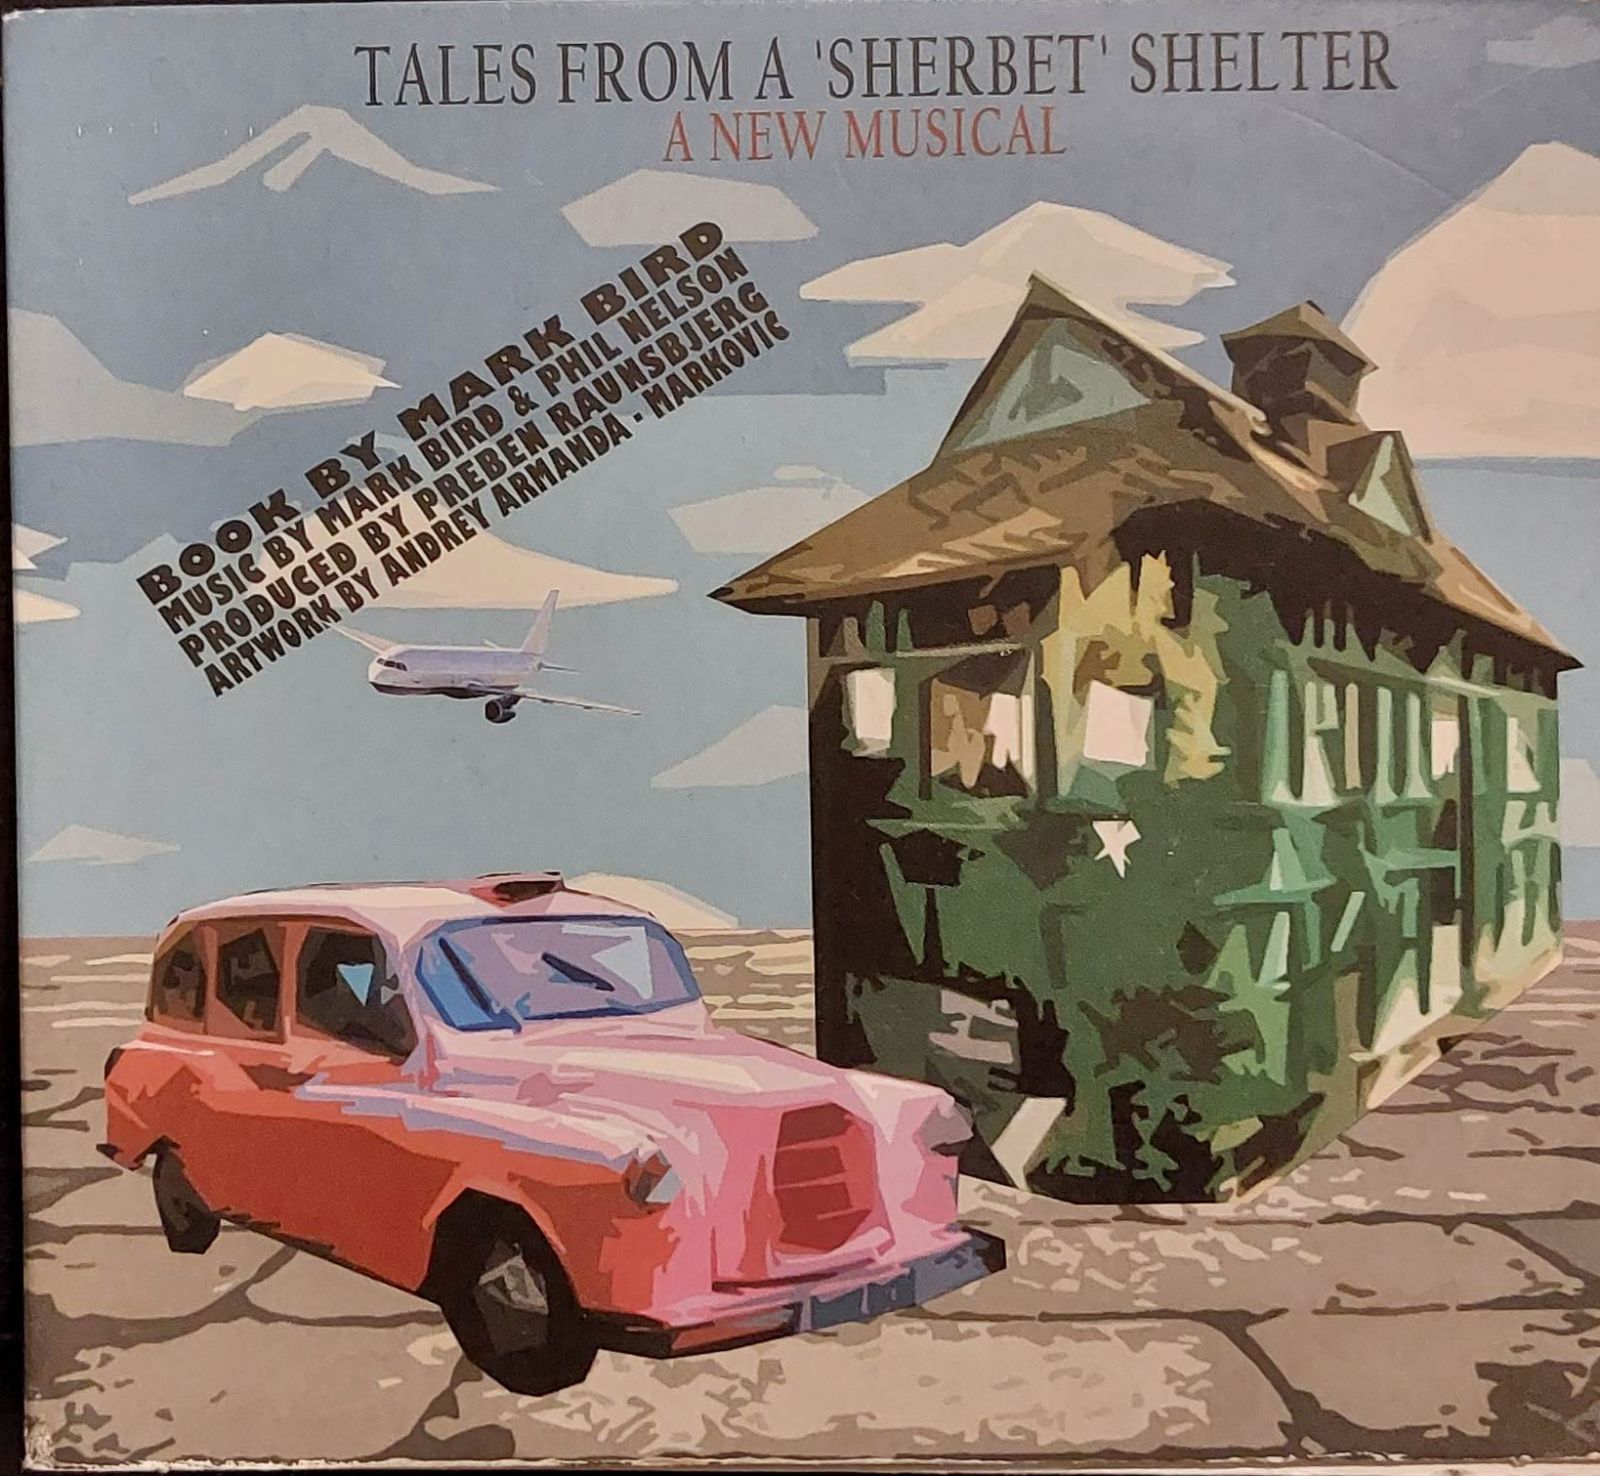 Tales form a Sherbet Shelter – Mark Bird and Phil Nelson (2017)